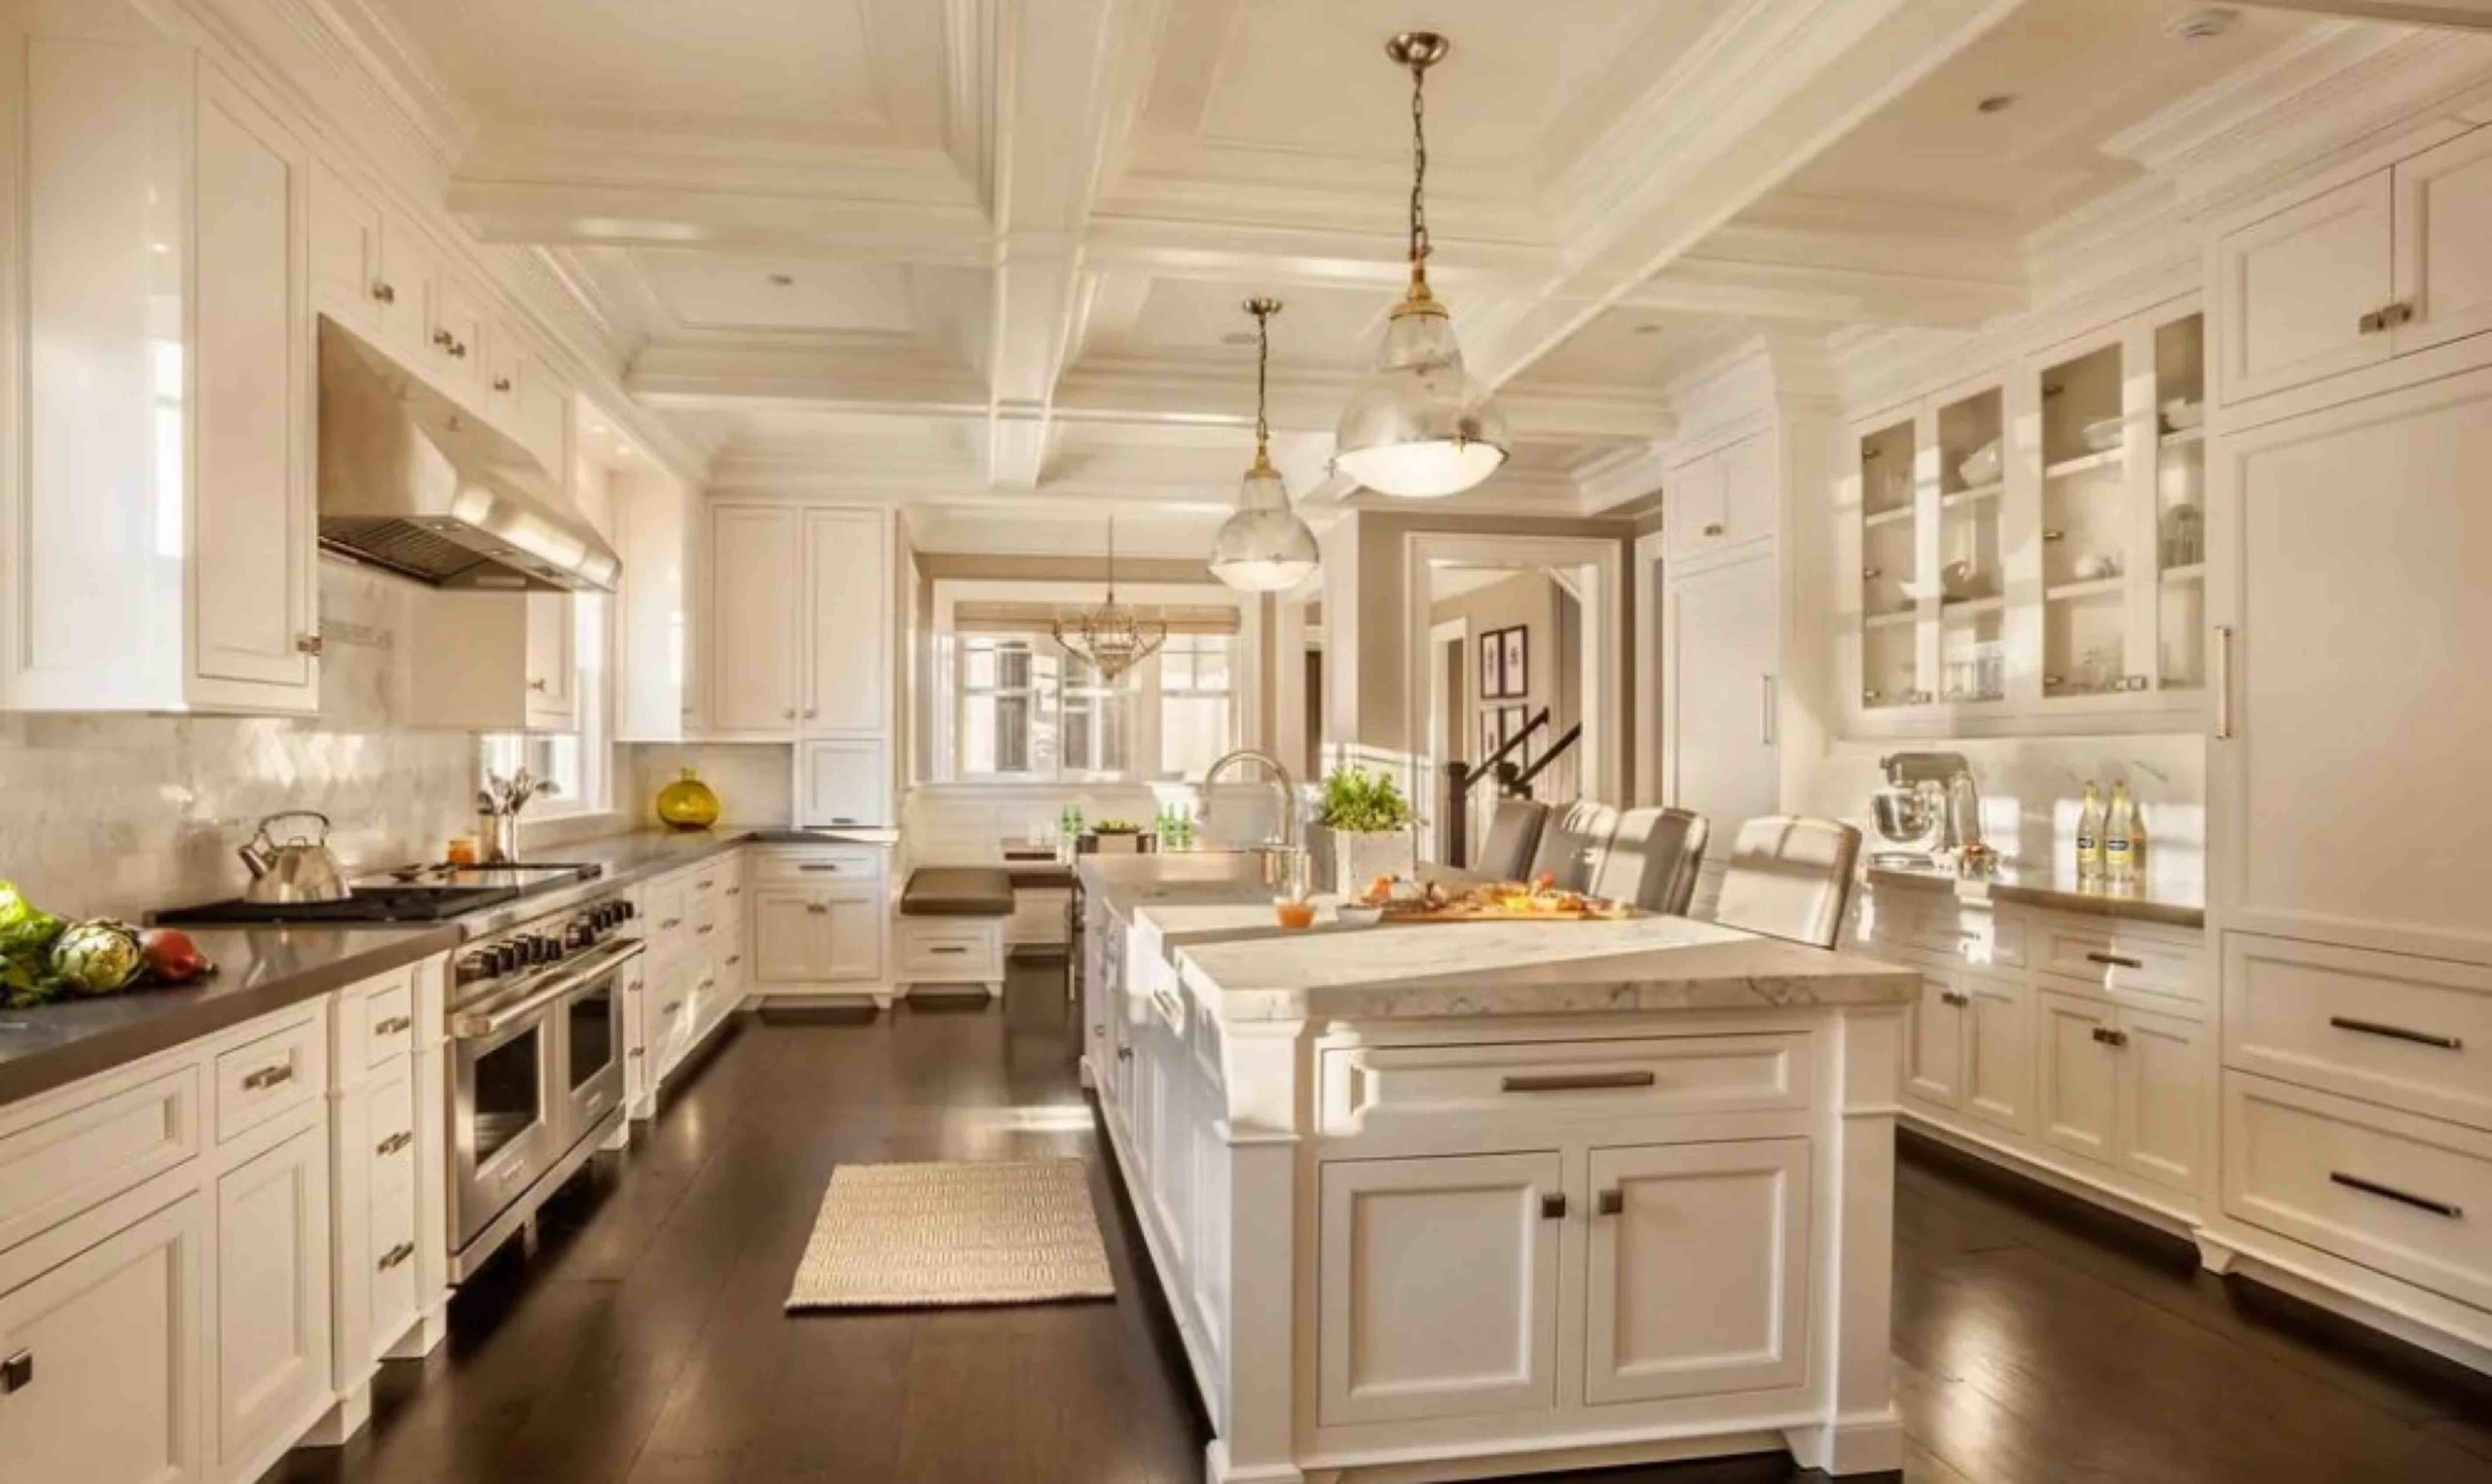 The One Thing You Need to Know About Great Kitchen Design